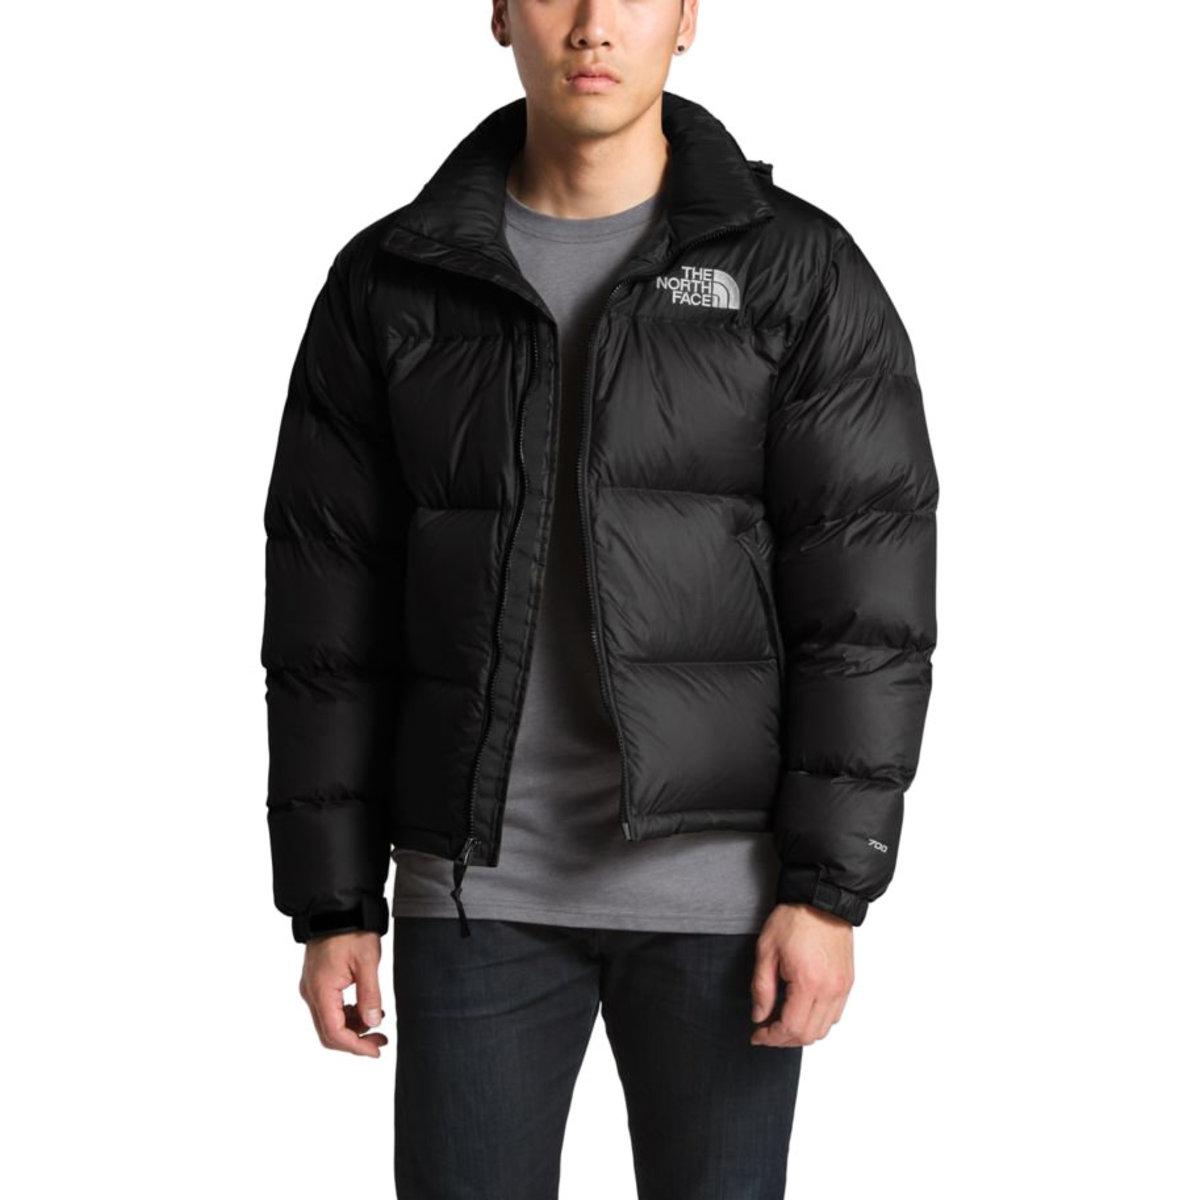 The North Face Synthetic 1996 Retro Nuptse Jacket in Black for Men - Lyst